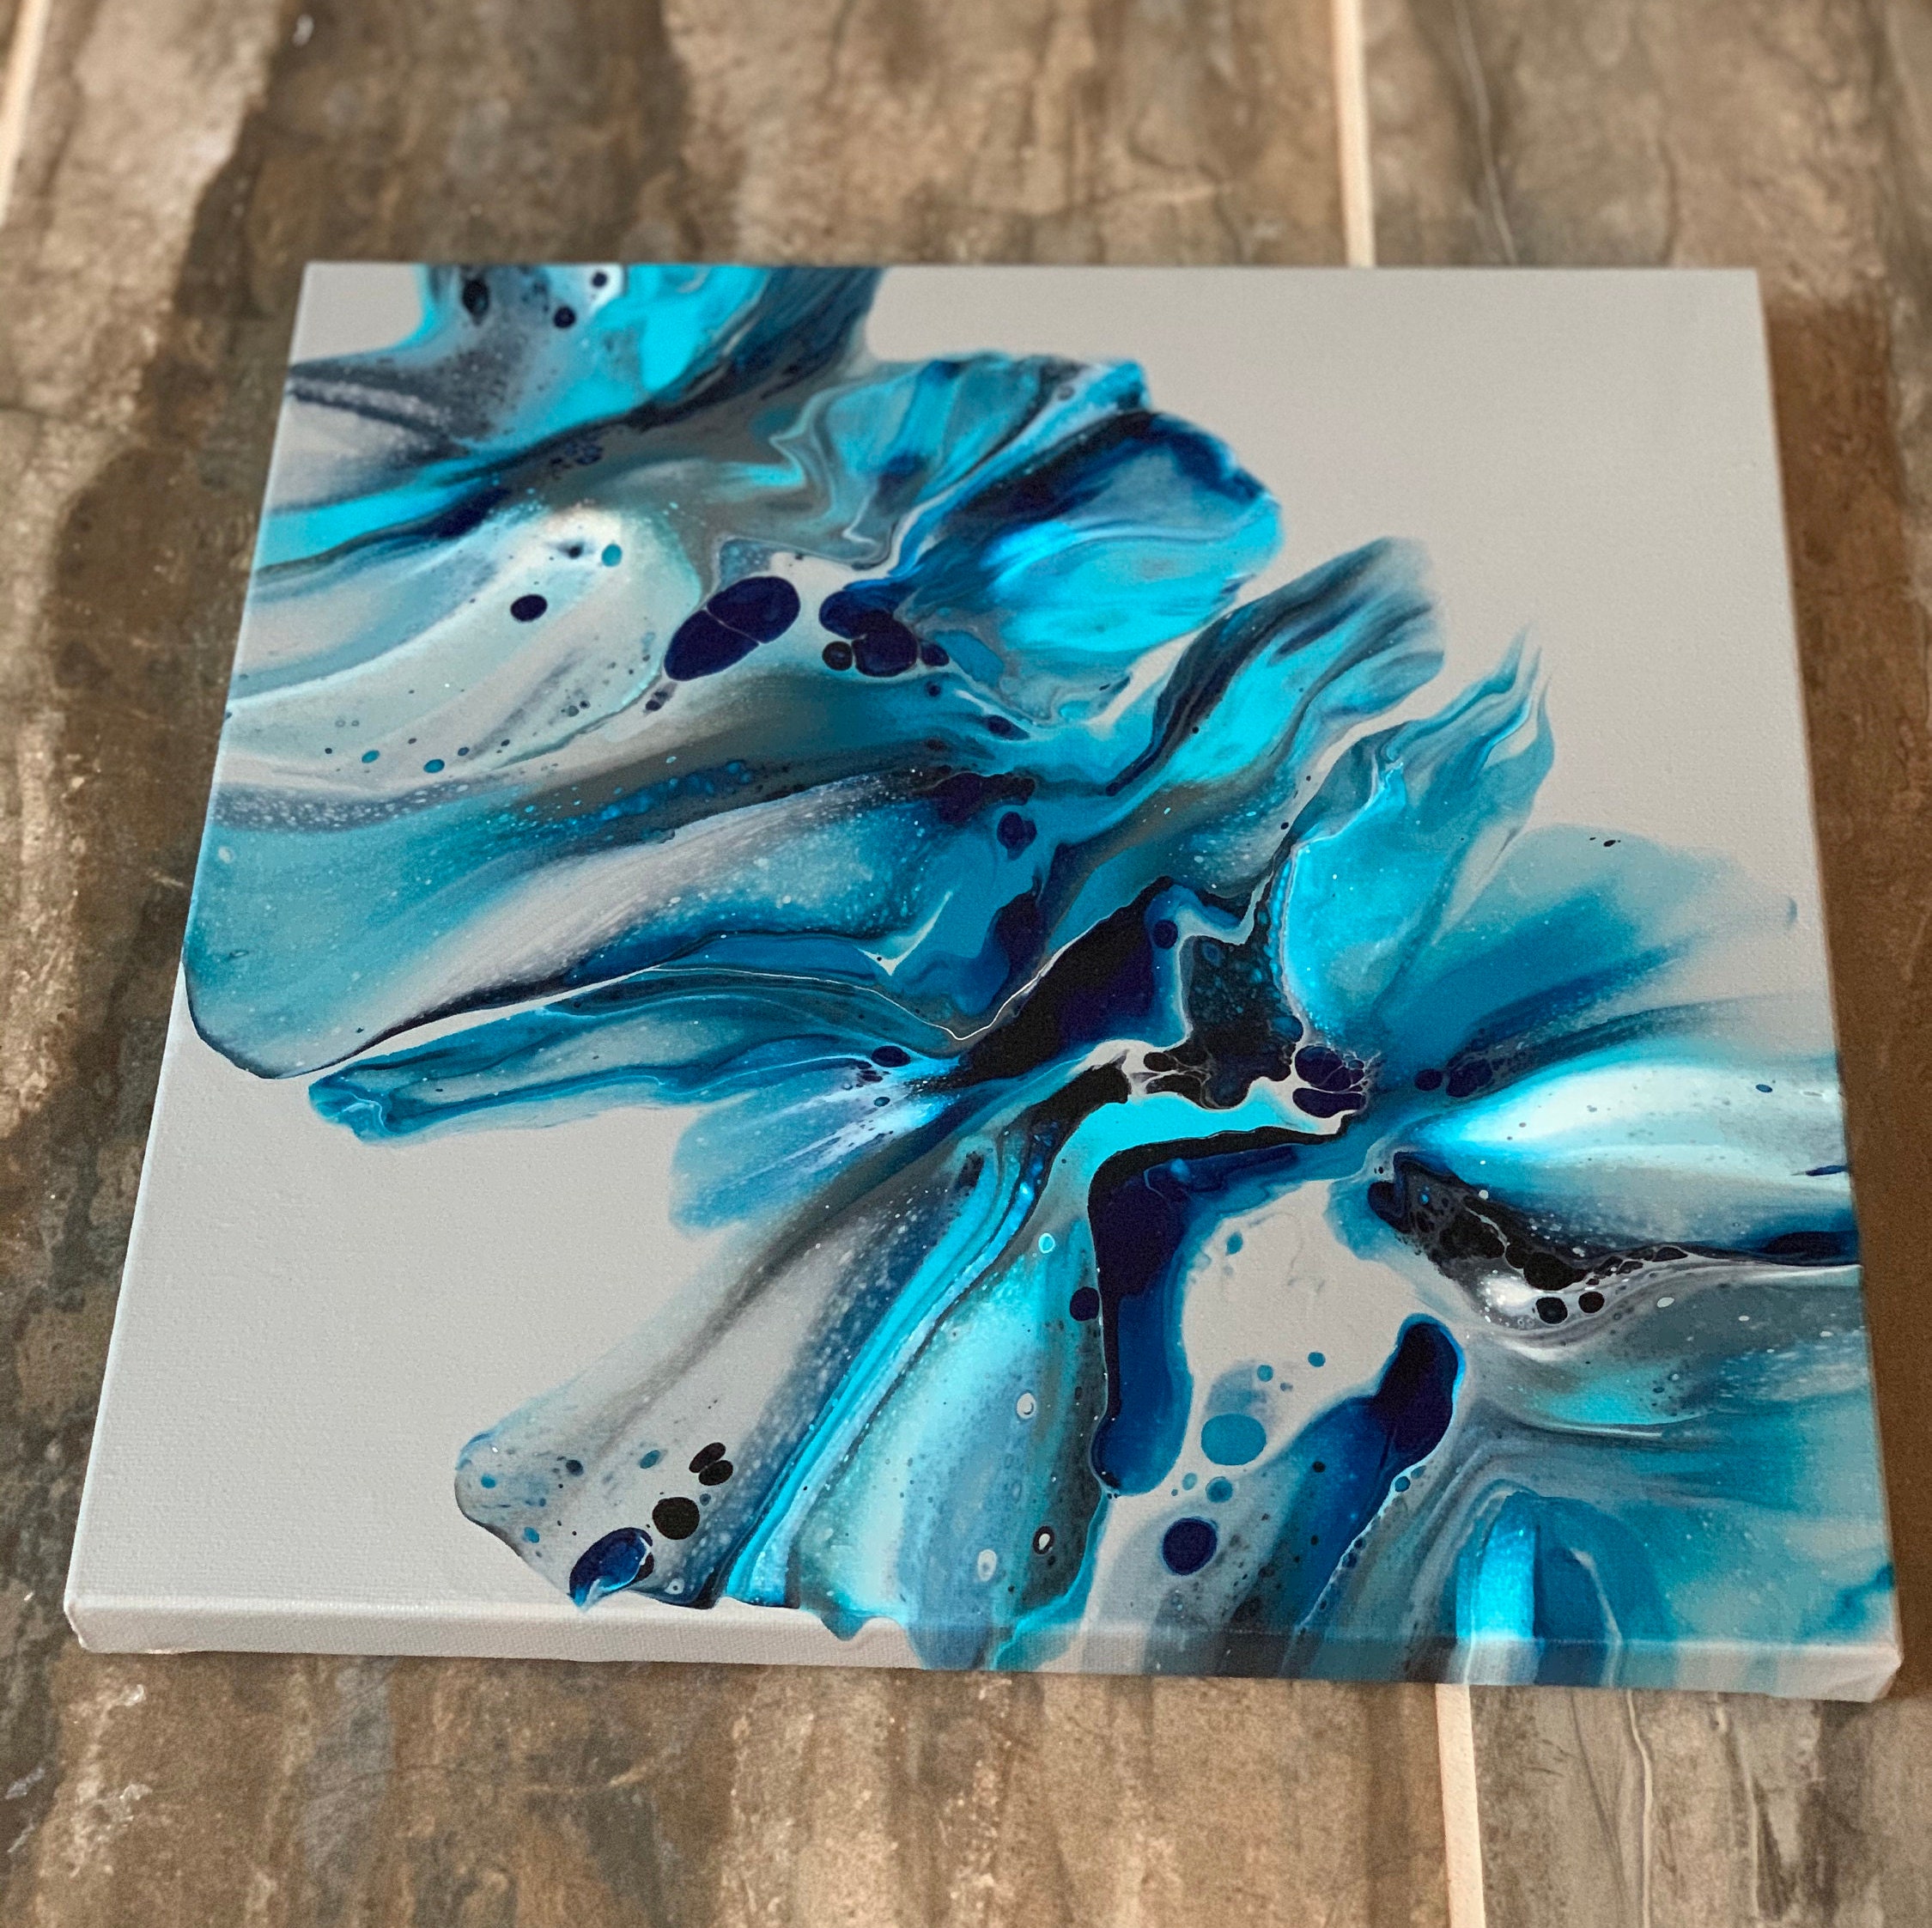 Acrylic Pour Art Dutch Pour Painting Fluid Abstract Art Original Abstract Acrylic Art Large Custom Made Acrylic Pour Painting